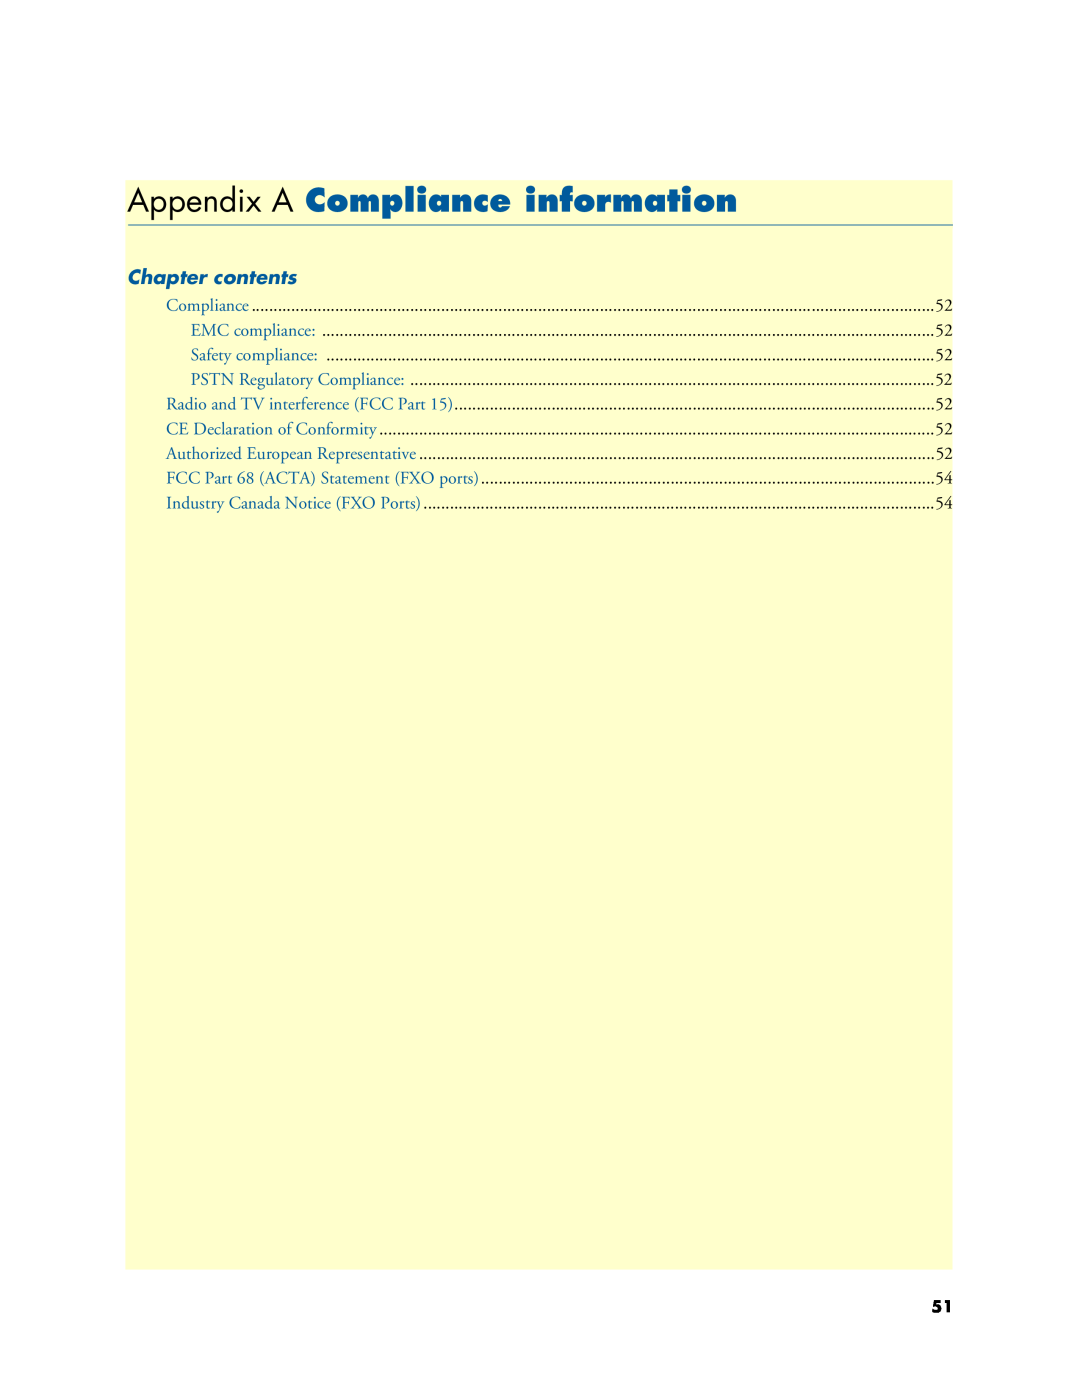 Patton electronic 4900 user manual Appendix A Compliance information, Chapter contents 